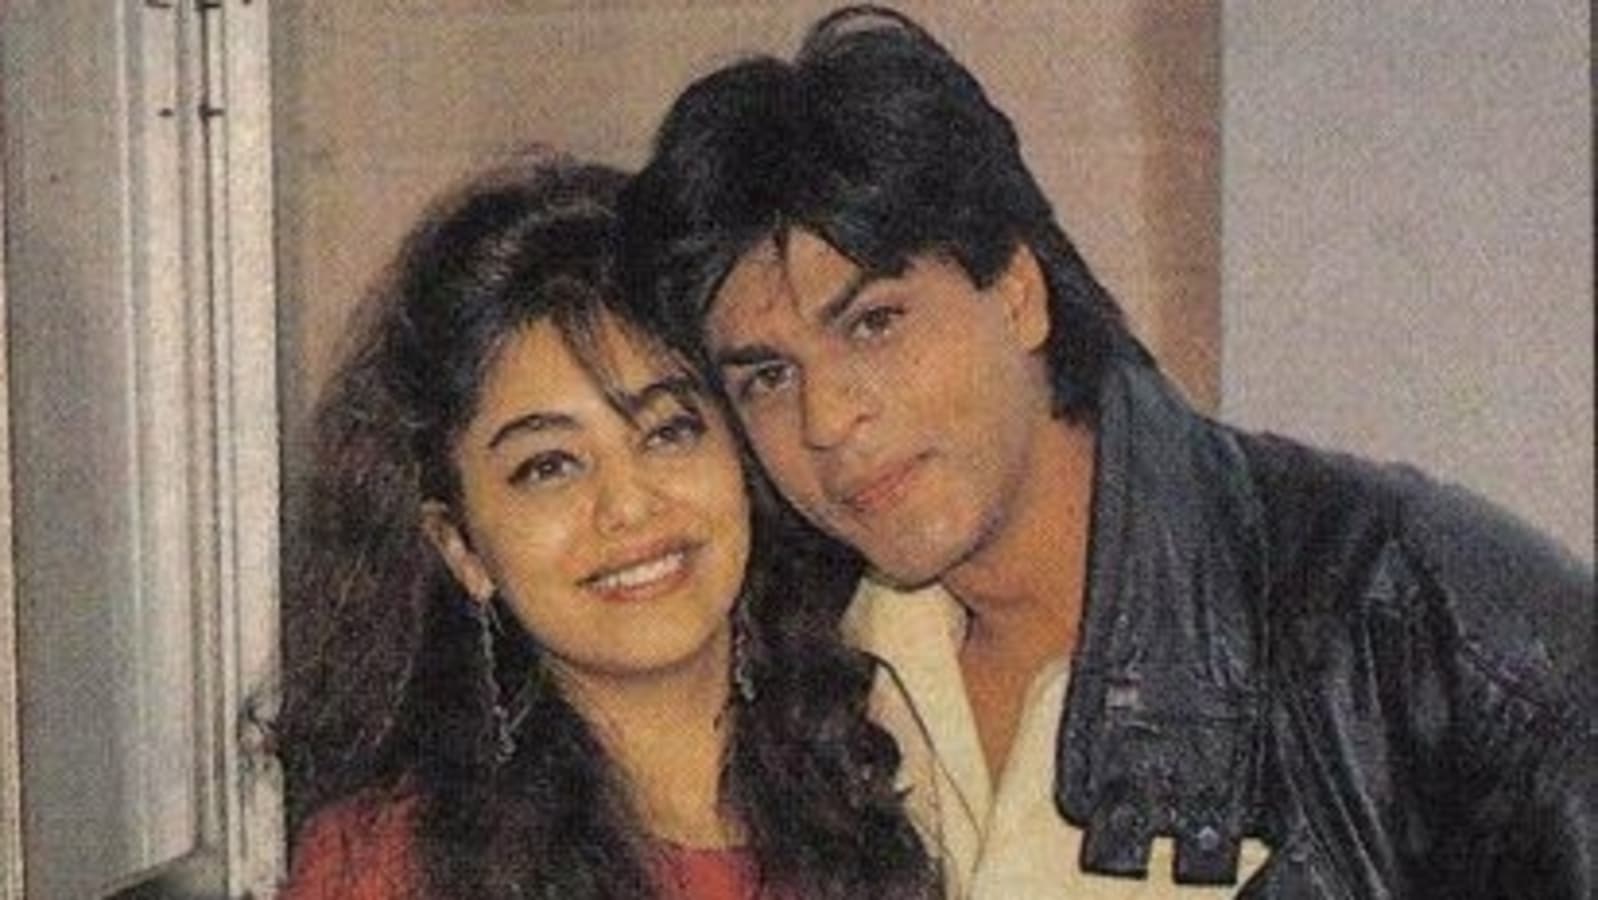 When Shah Rukh told Gauri Khan to stop worrying about his sleeping